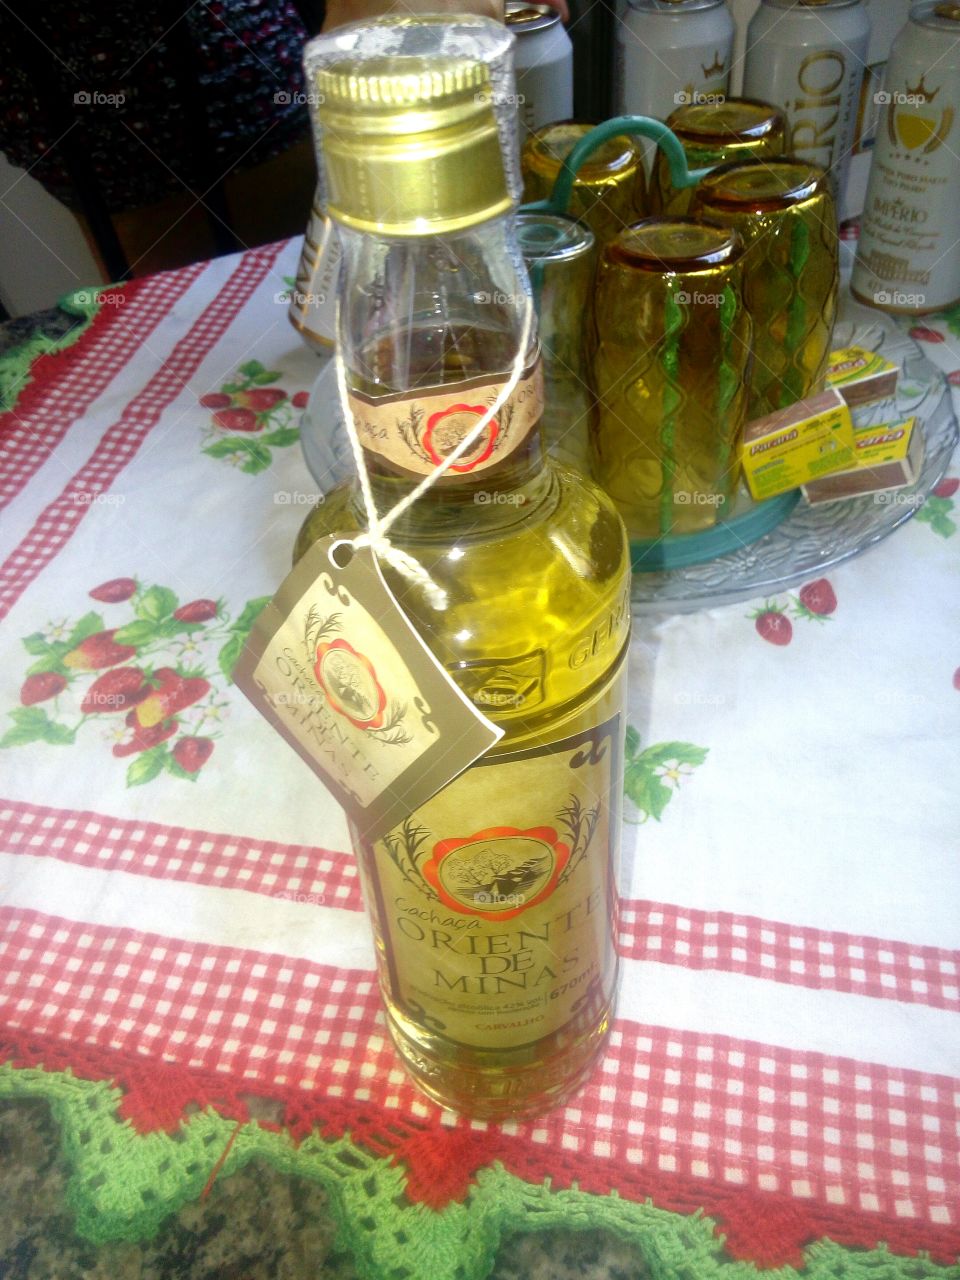 Brazilian cachaça on the table covered by red and white cloth